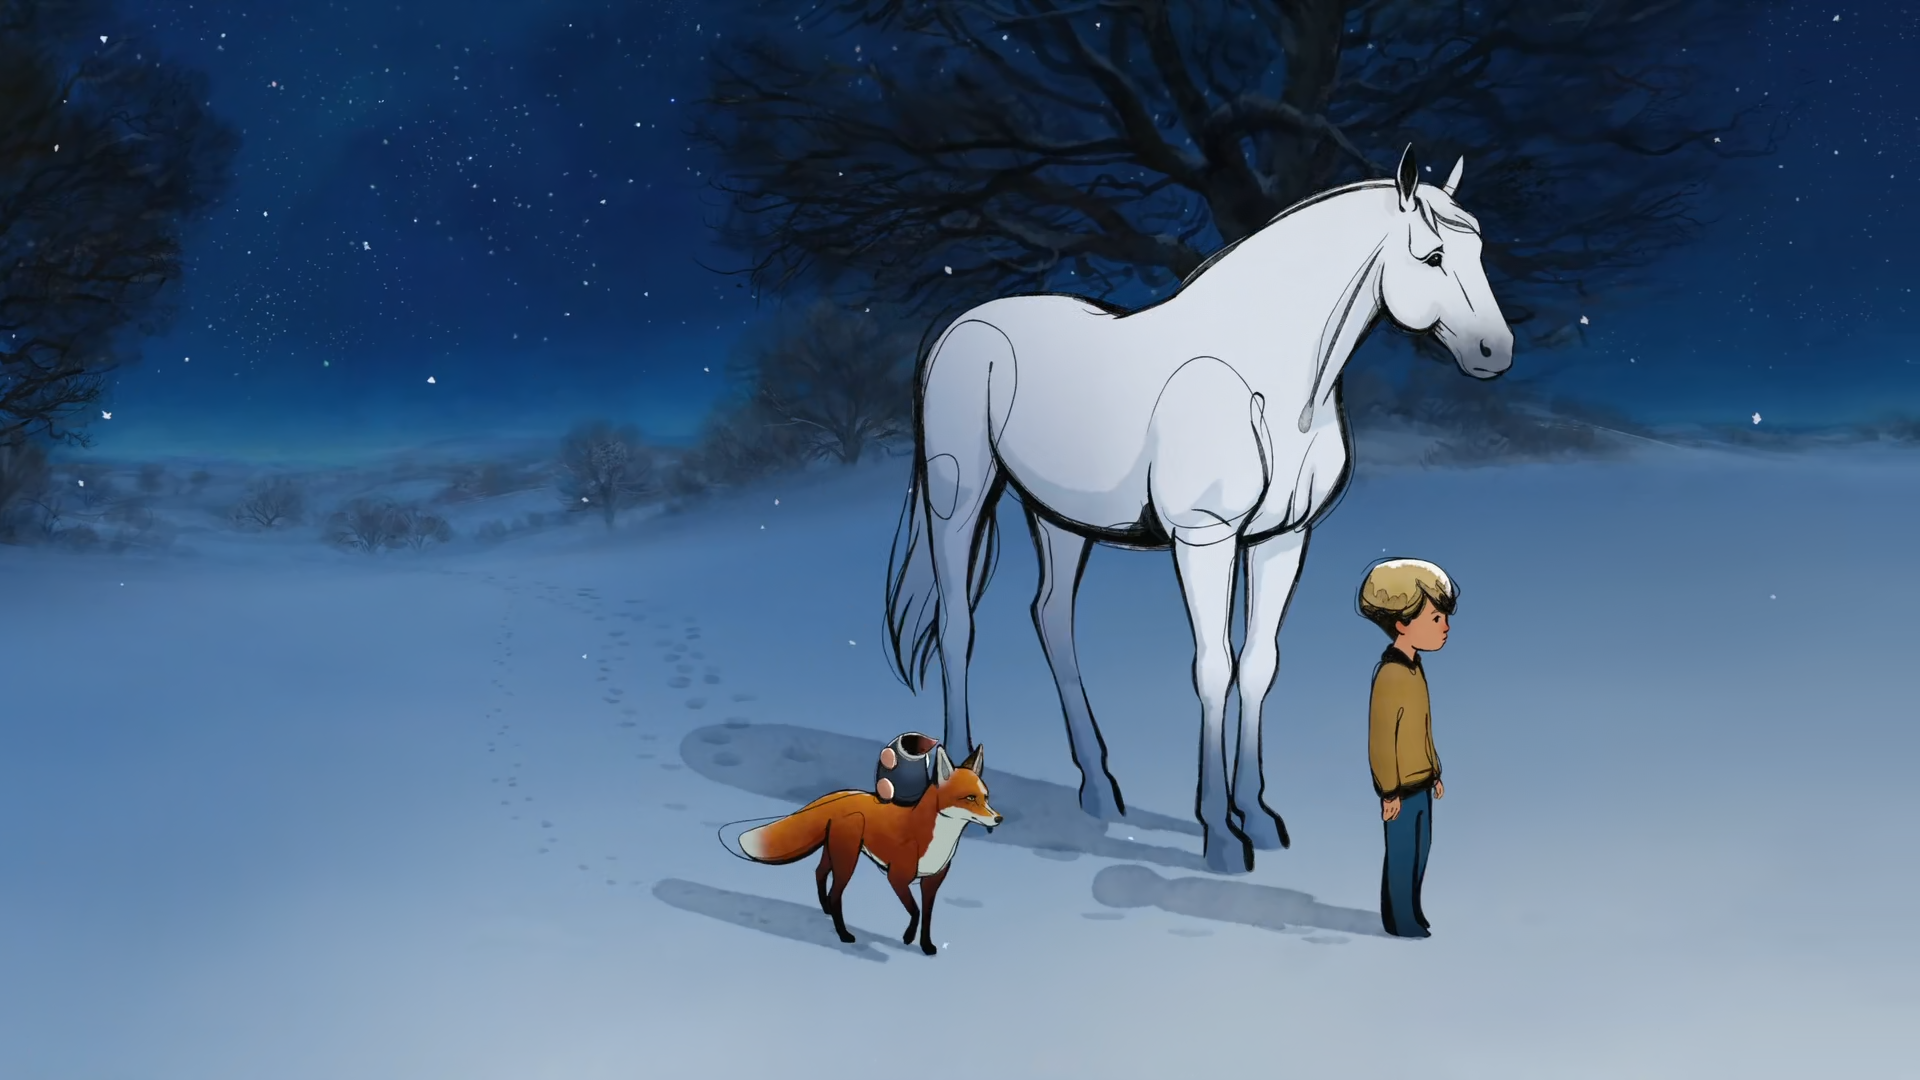 img/desk/2023/the-boy-the-mole-the-fox-and-the-horse/the-boy-9.png